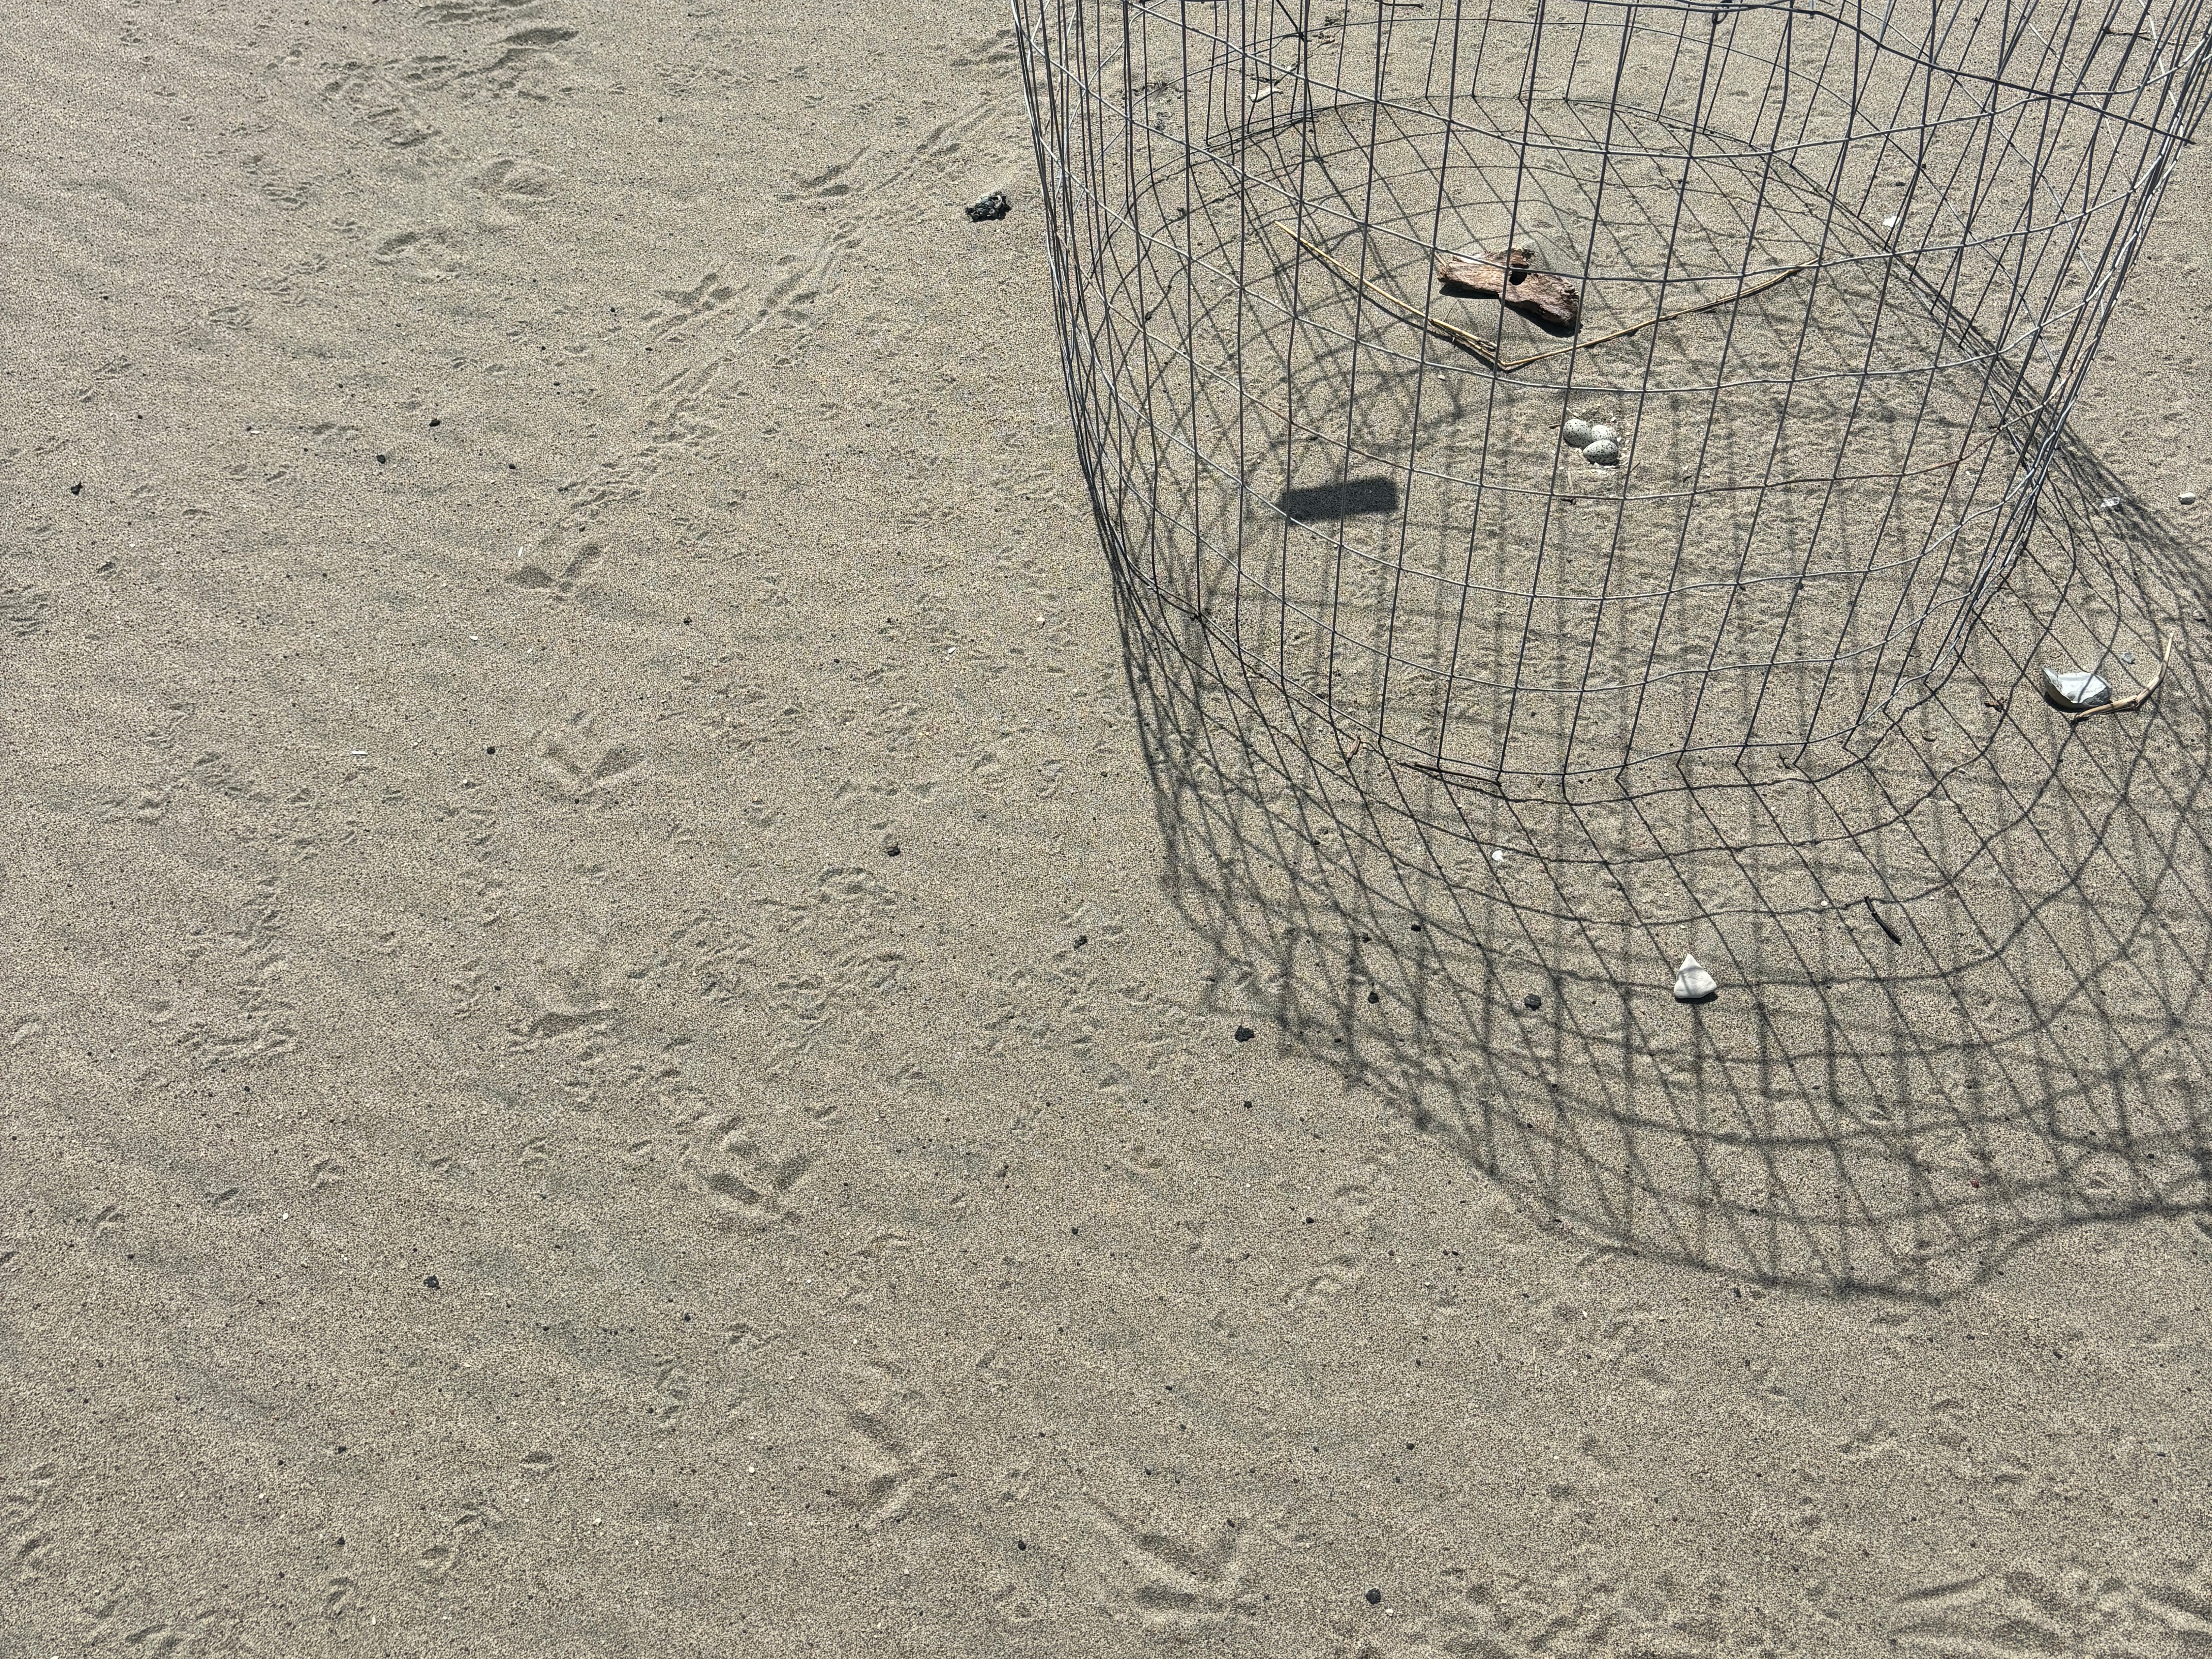 A photo of a small and medium-sized bird footprints in the sand around the edge of a cylindrical wire exclosure protecting three small eggs.